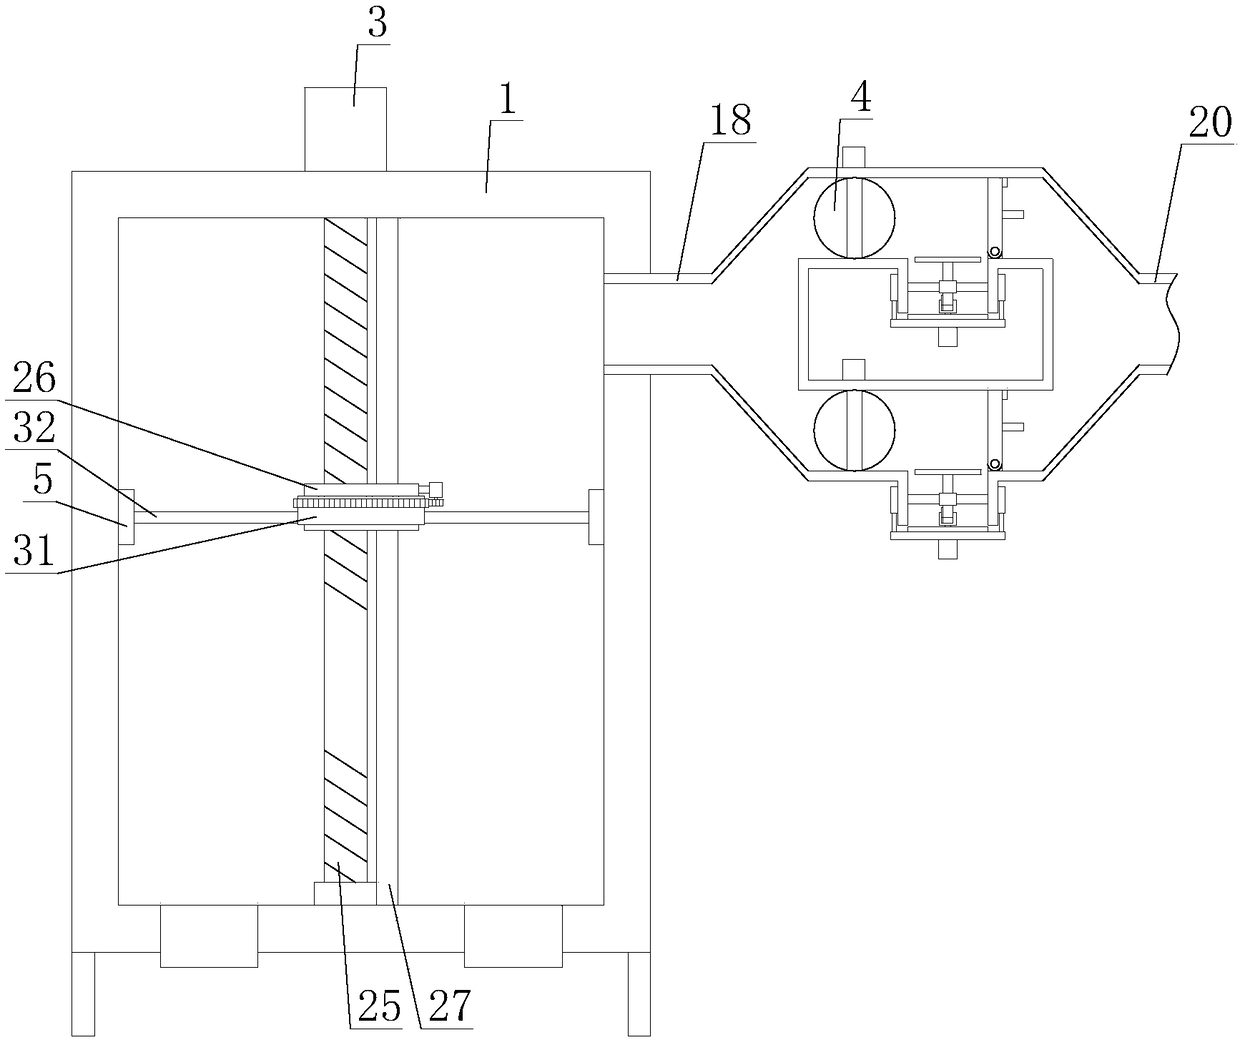 Boiler with pipeline impurity cleaning function based on Internet of Things